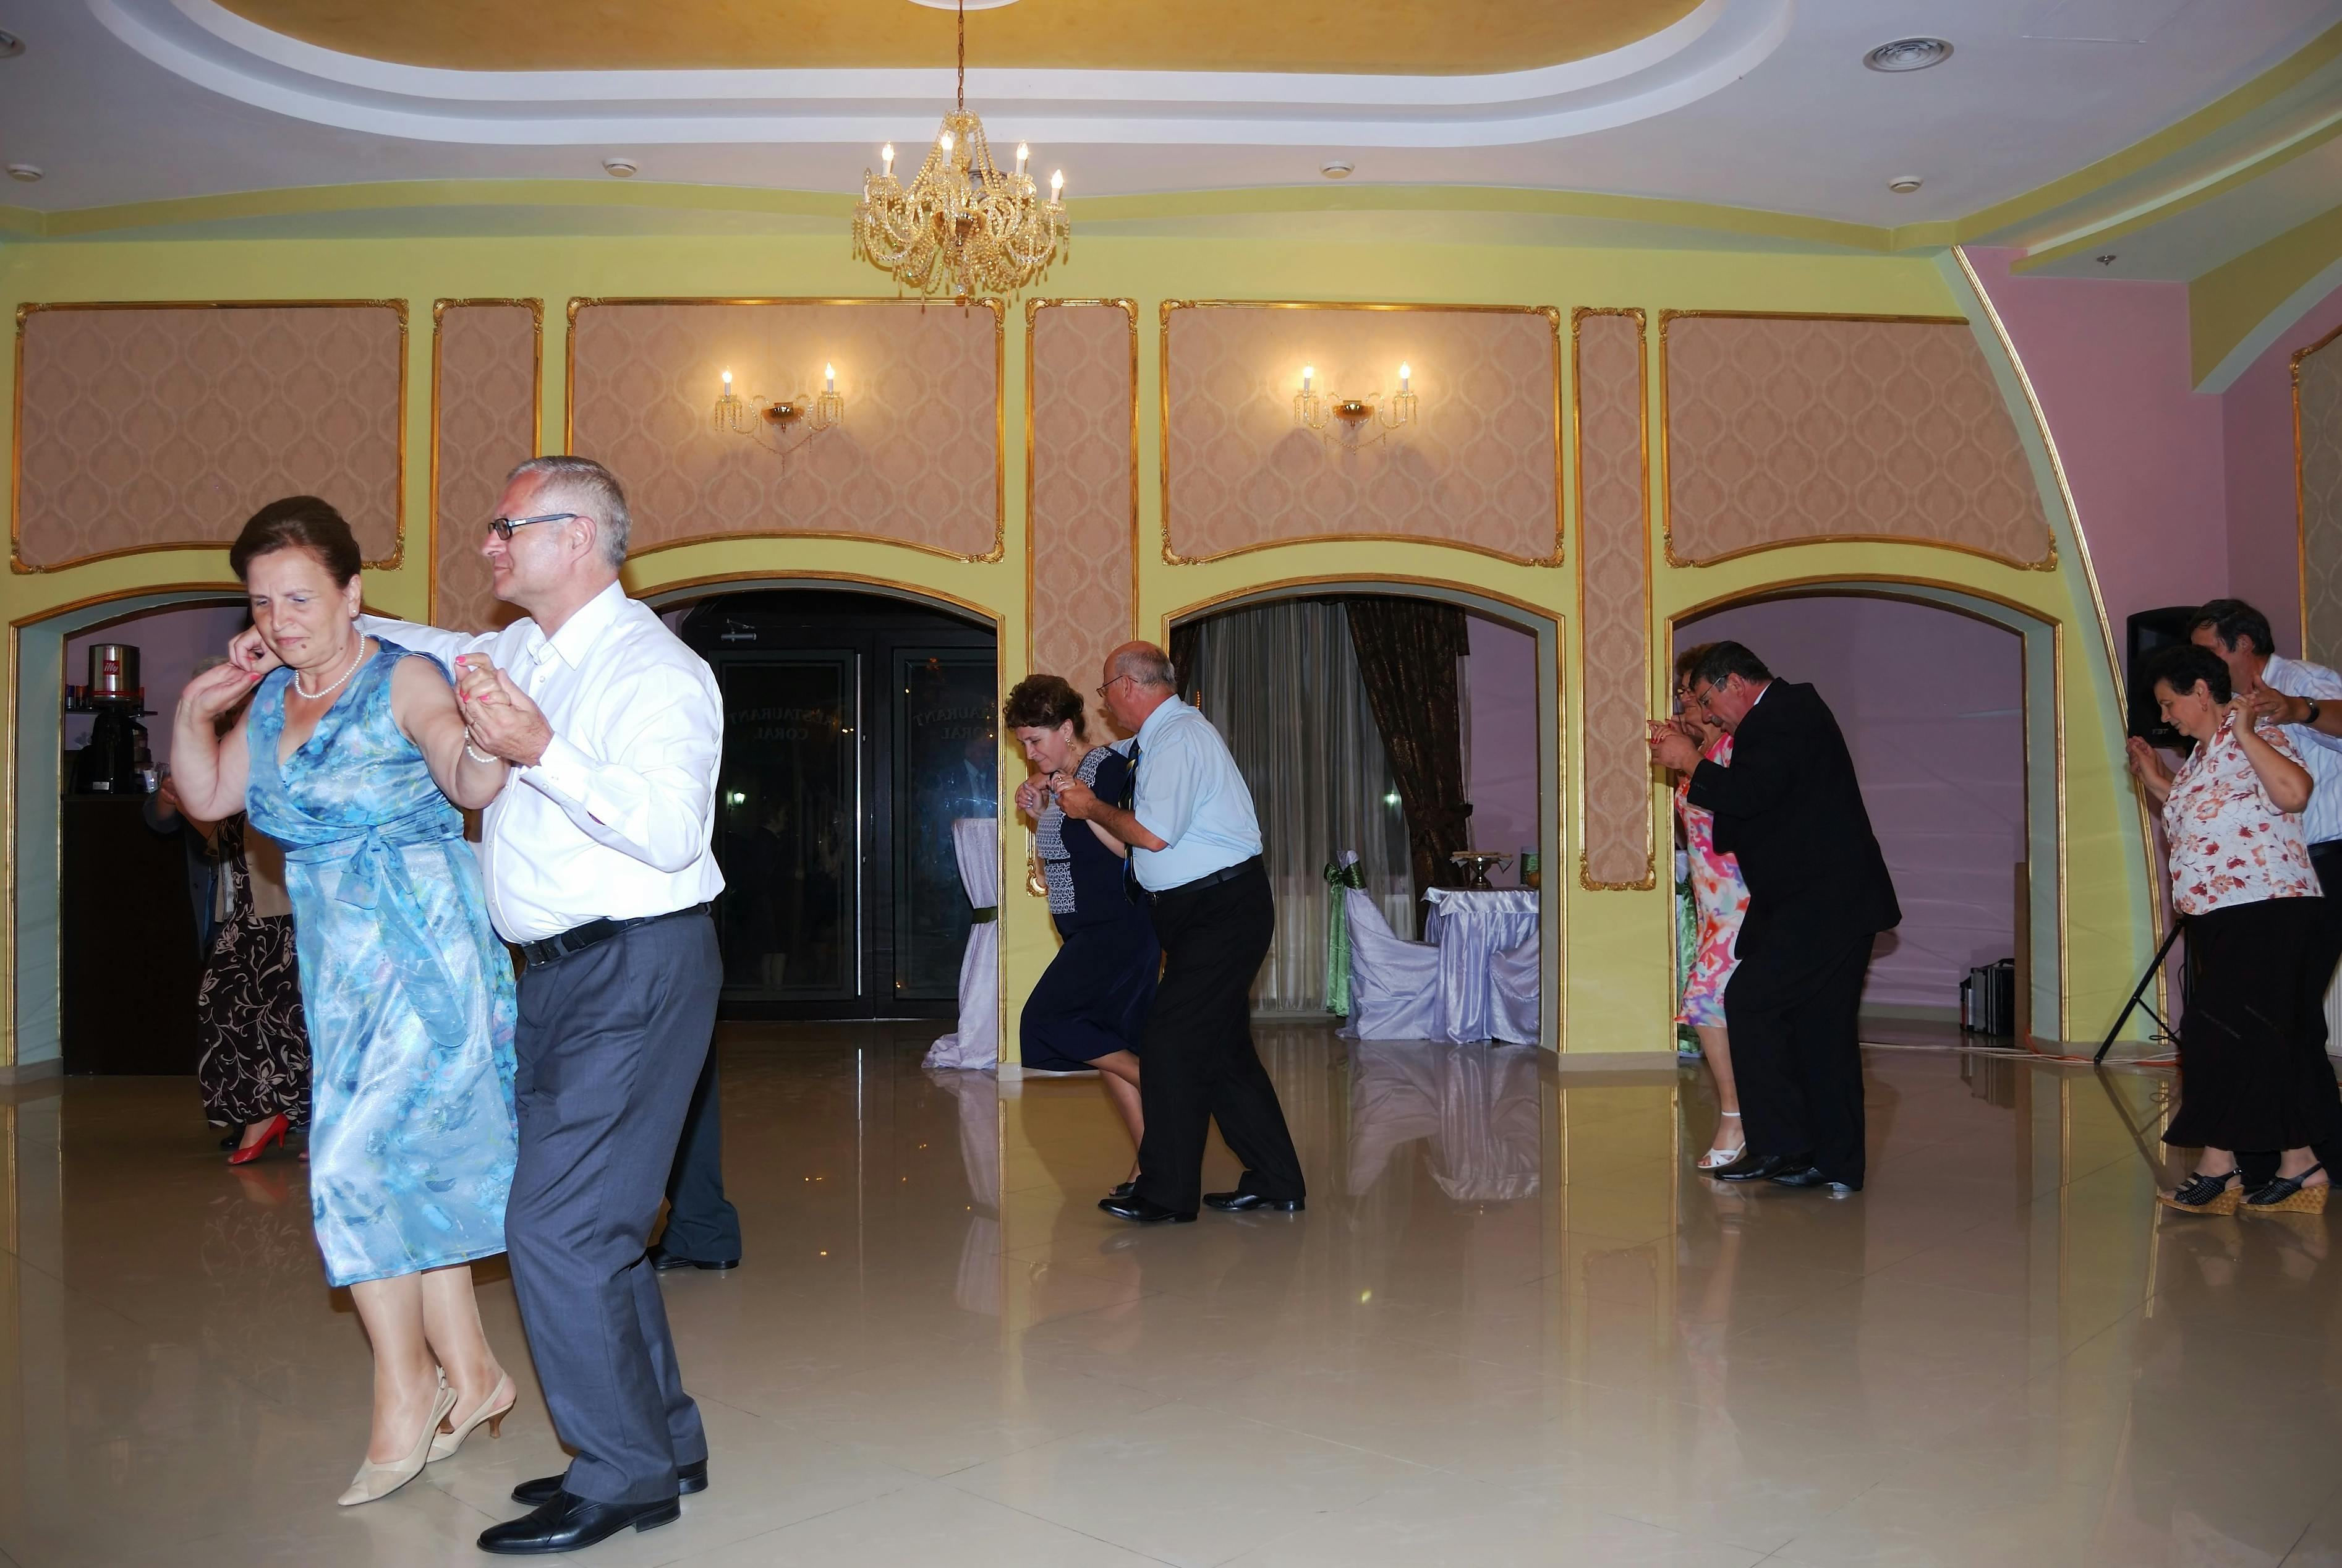 Free stock photo of celebration, cheerful mood, old people dancing at an event